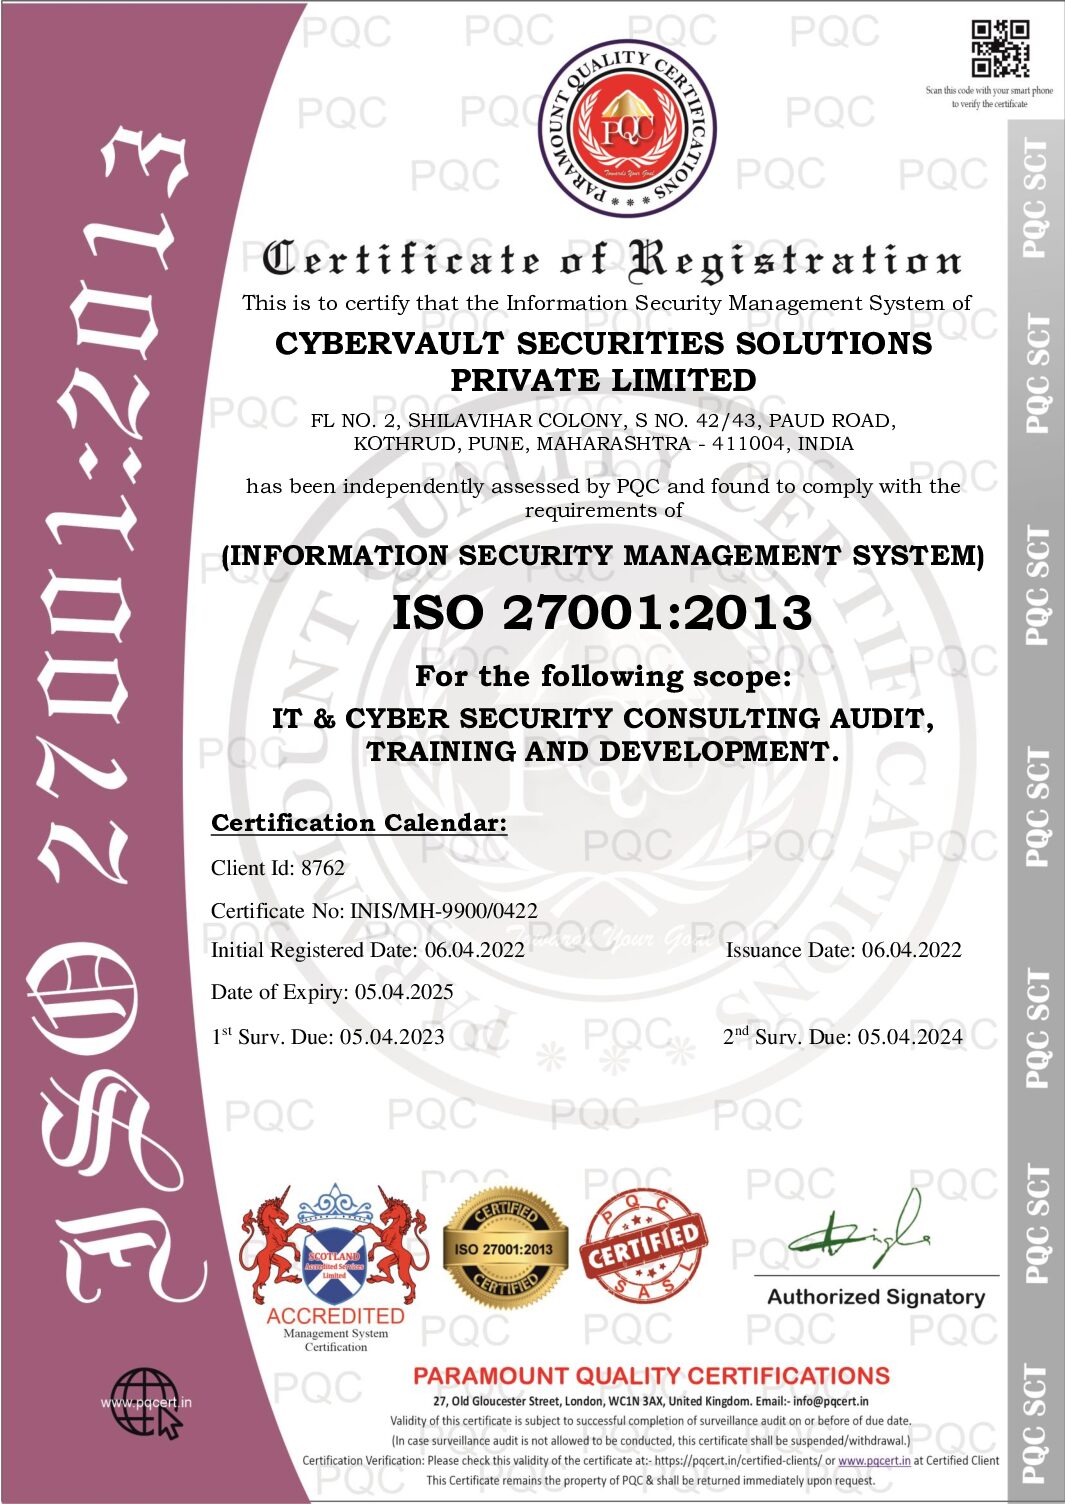 8762_CYBERVAULT-SECURITIES-SOLUTIONS-PRIVATE-LIMITED_27001-pdf